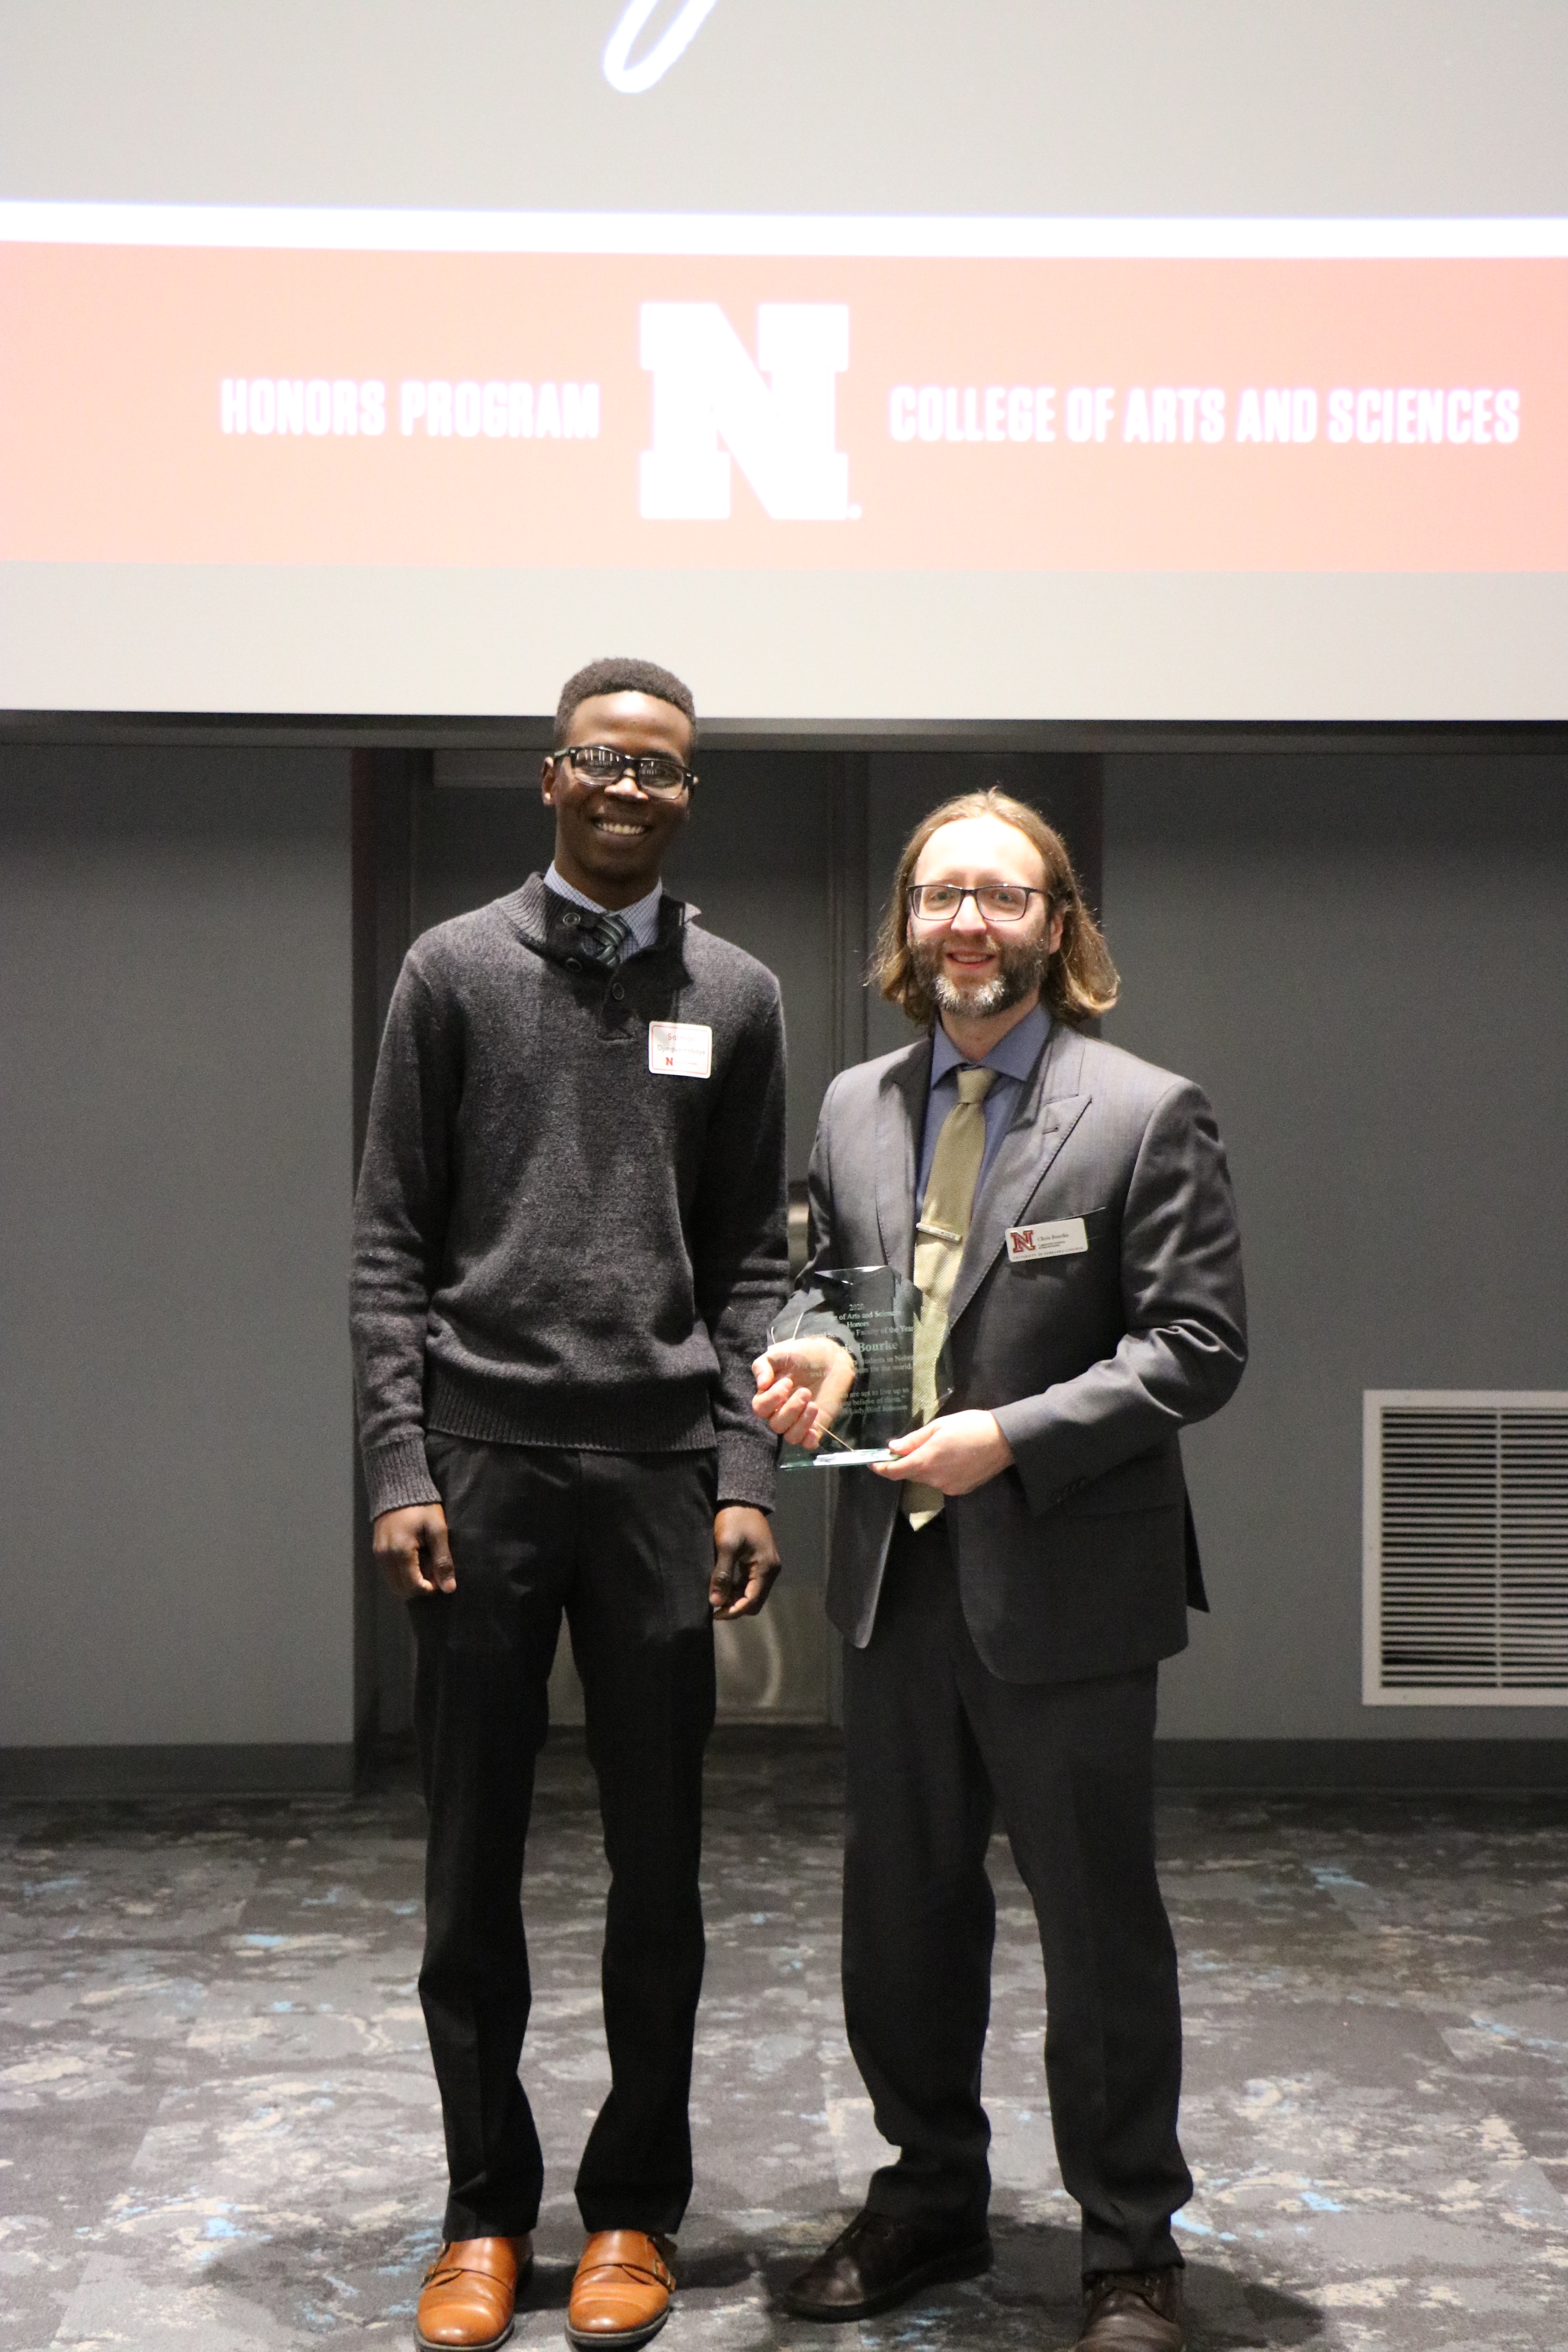 Chris Bourke accepting his award at yesterday's CAS Honors ceremony with student speaker Salman Djingueinabaye.